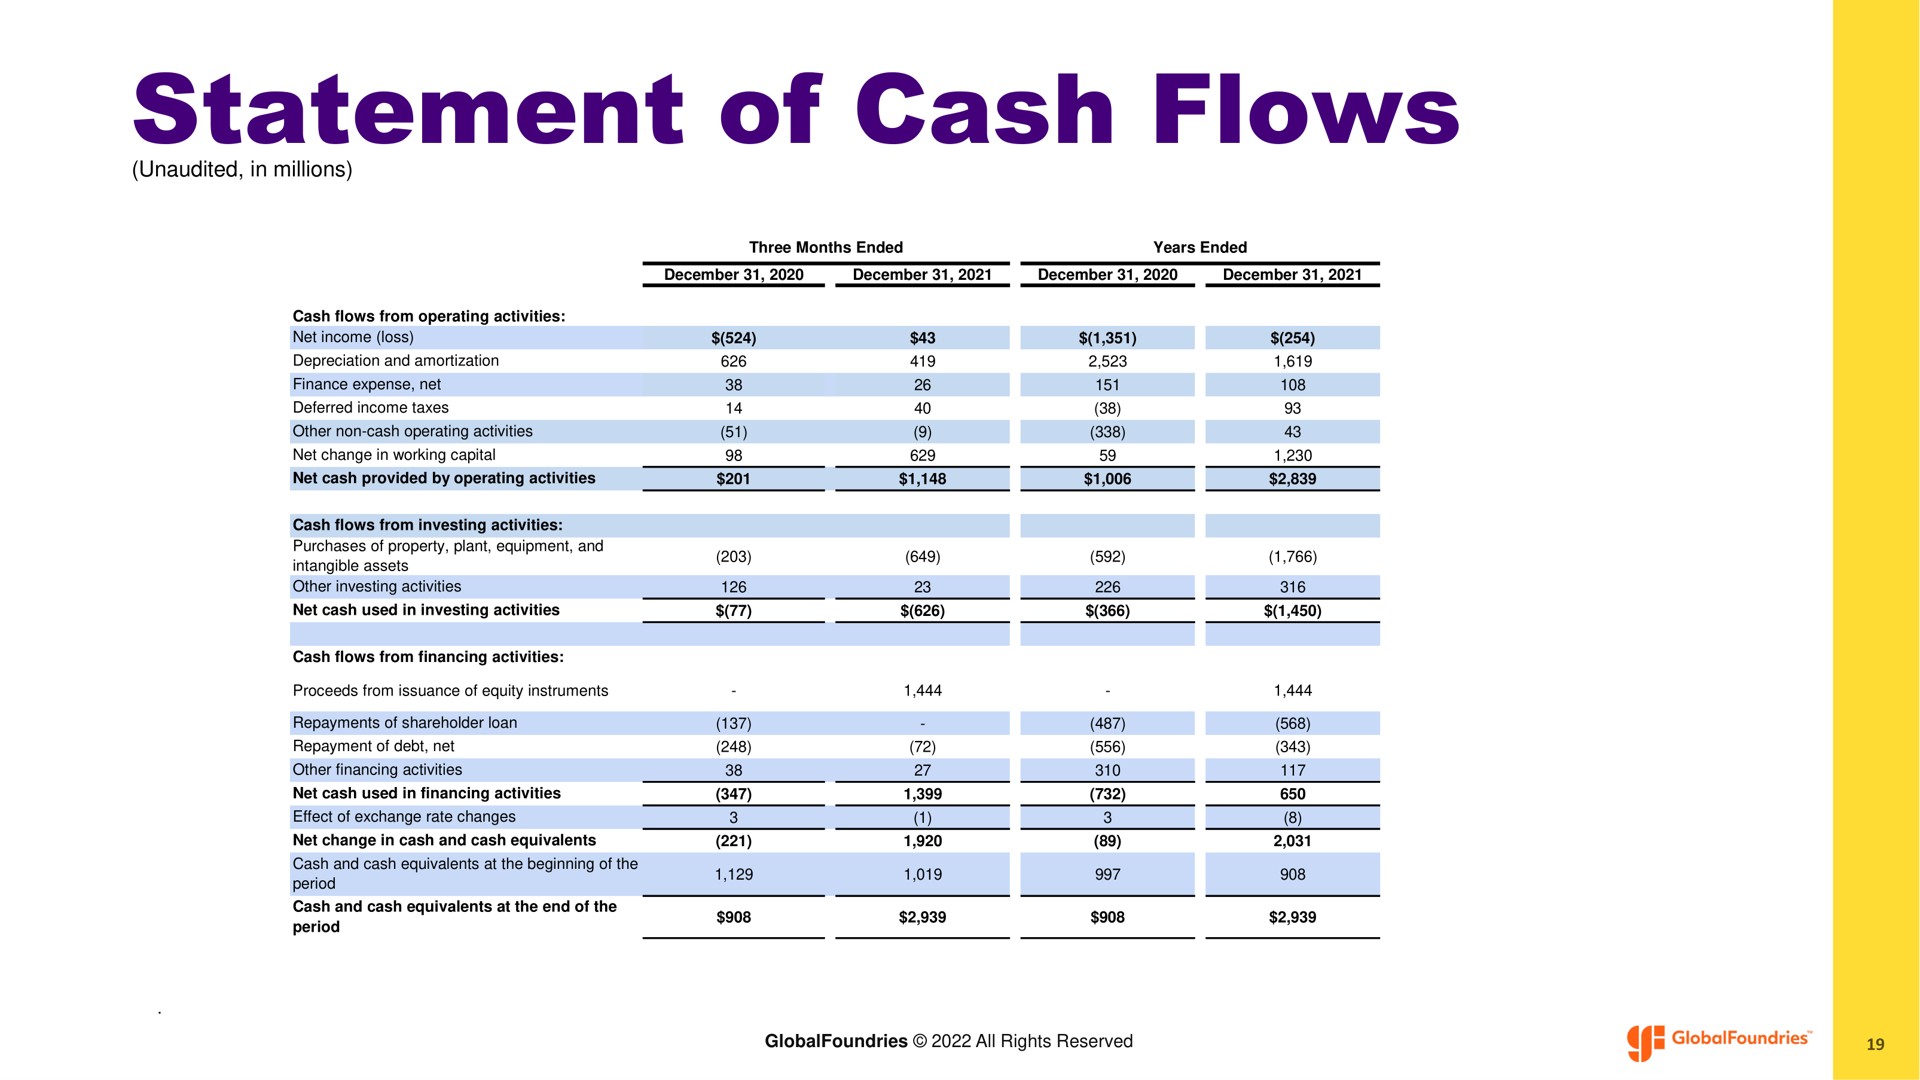 statement of cash flows | GlobalFoundries